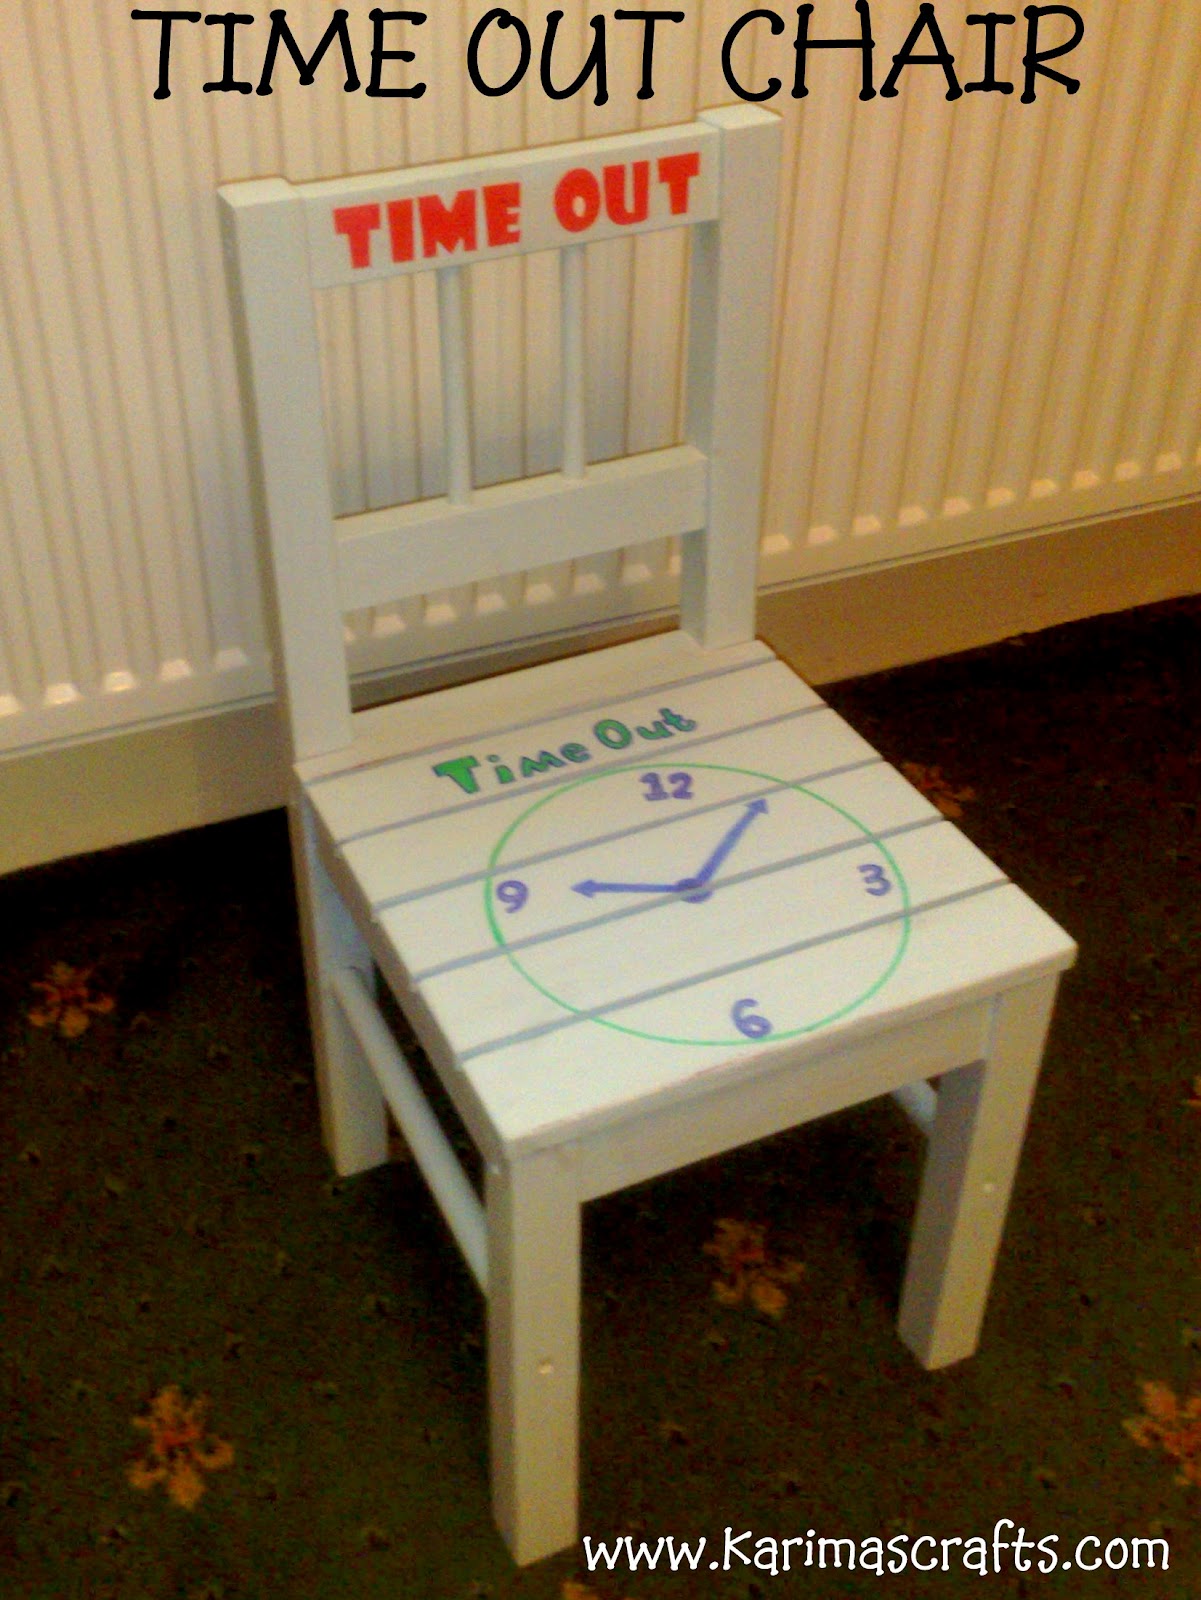 karima's crafts time out chair tutorial